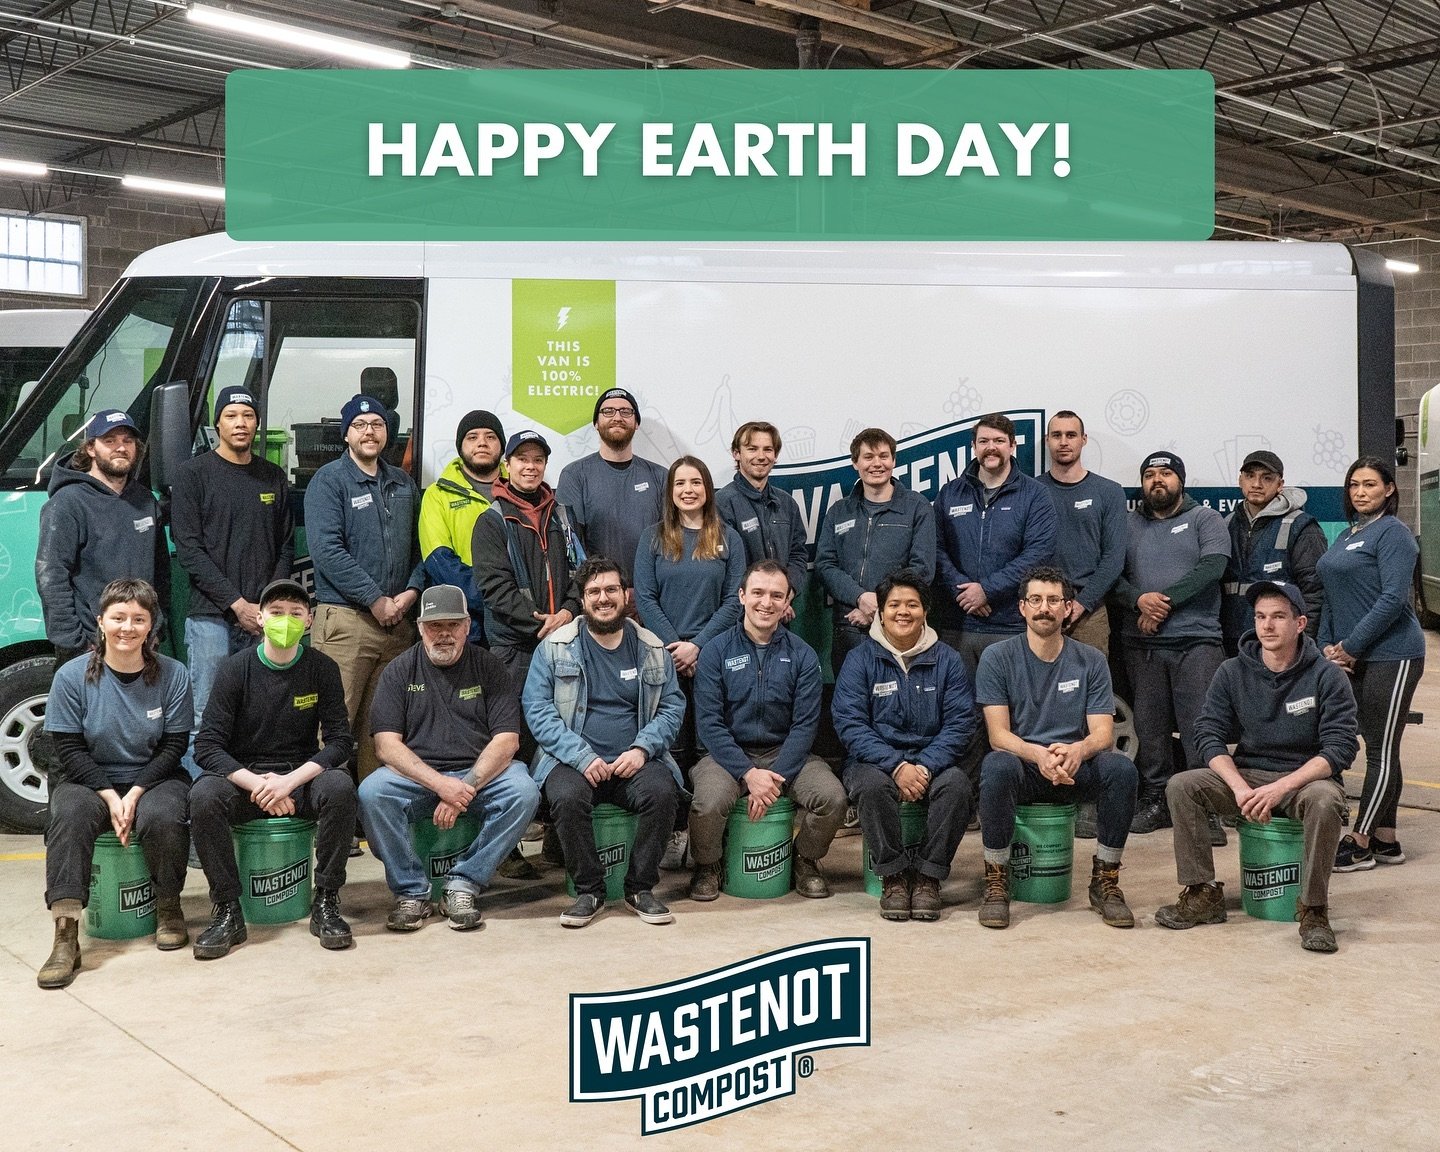 Happy #EarthDay! 🌎💚 

Thank YOU for supporting our work and for the simple daily habit of placing your compostables into a different colored bin. Our team is inspired everyday by the efforts being made by members like you who make their lives a lit